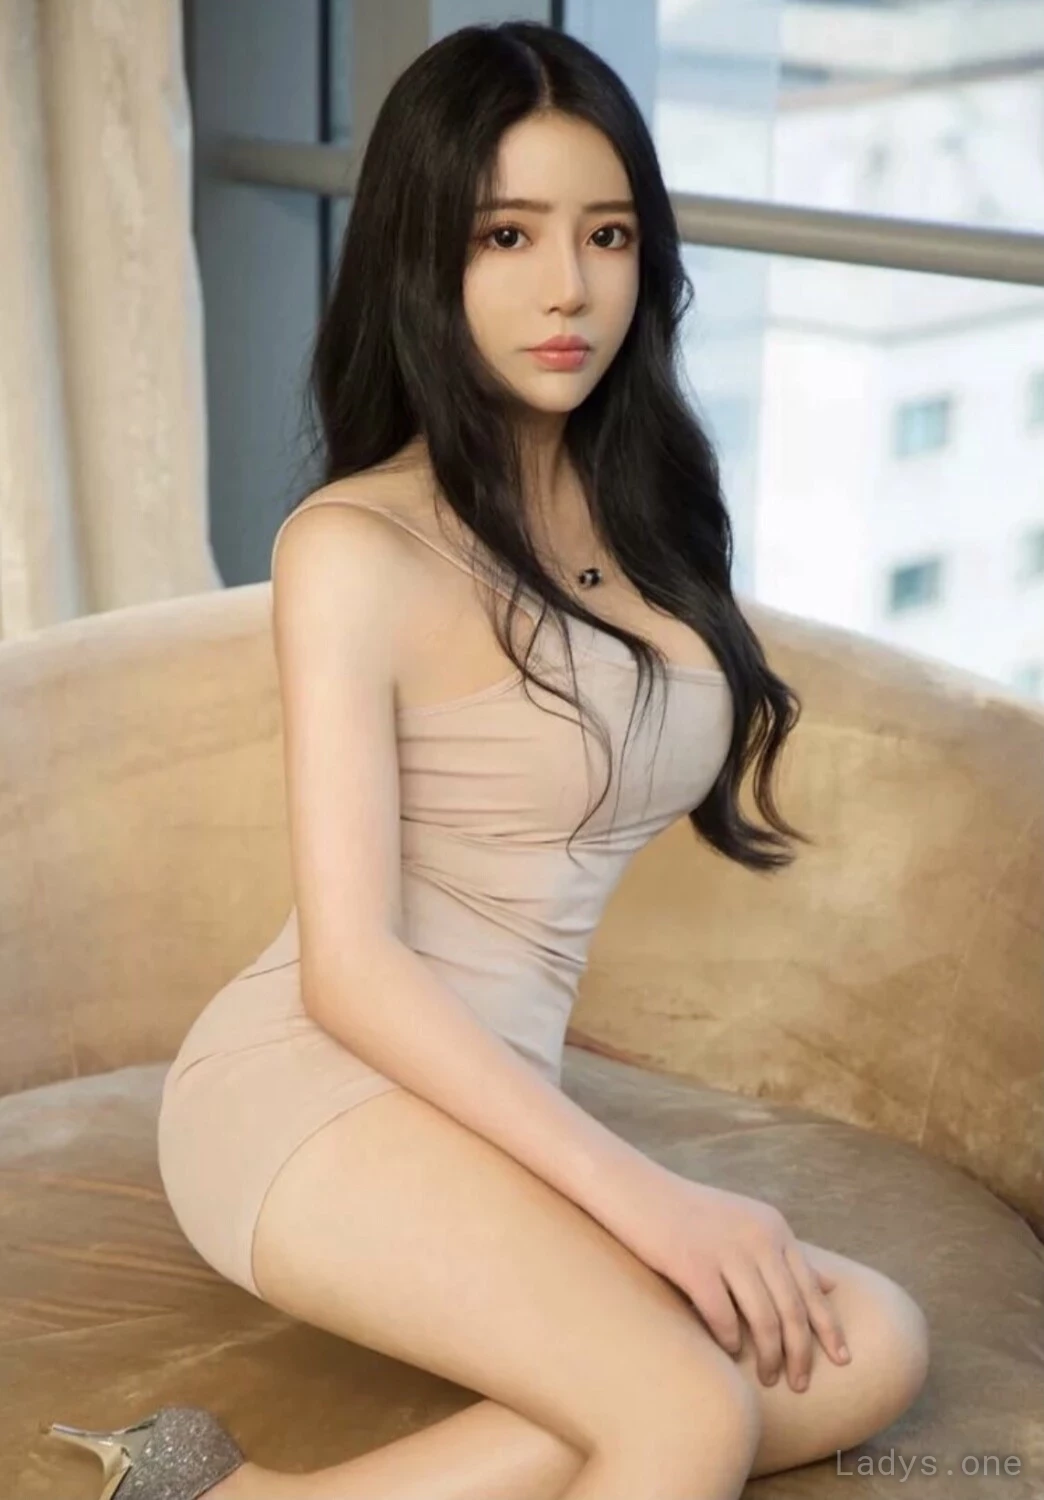 Outcall Asian Party Girl. 9296337766, 23 years beautiful nude Manhattan escorts girl, height 156 sm, Weight 46 kg